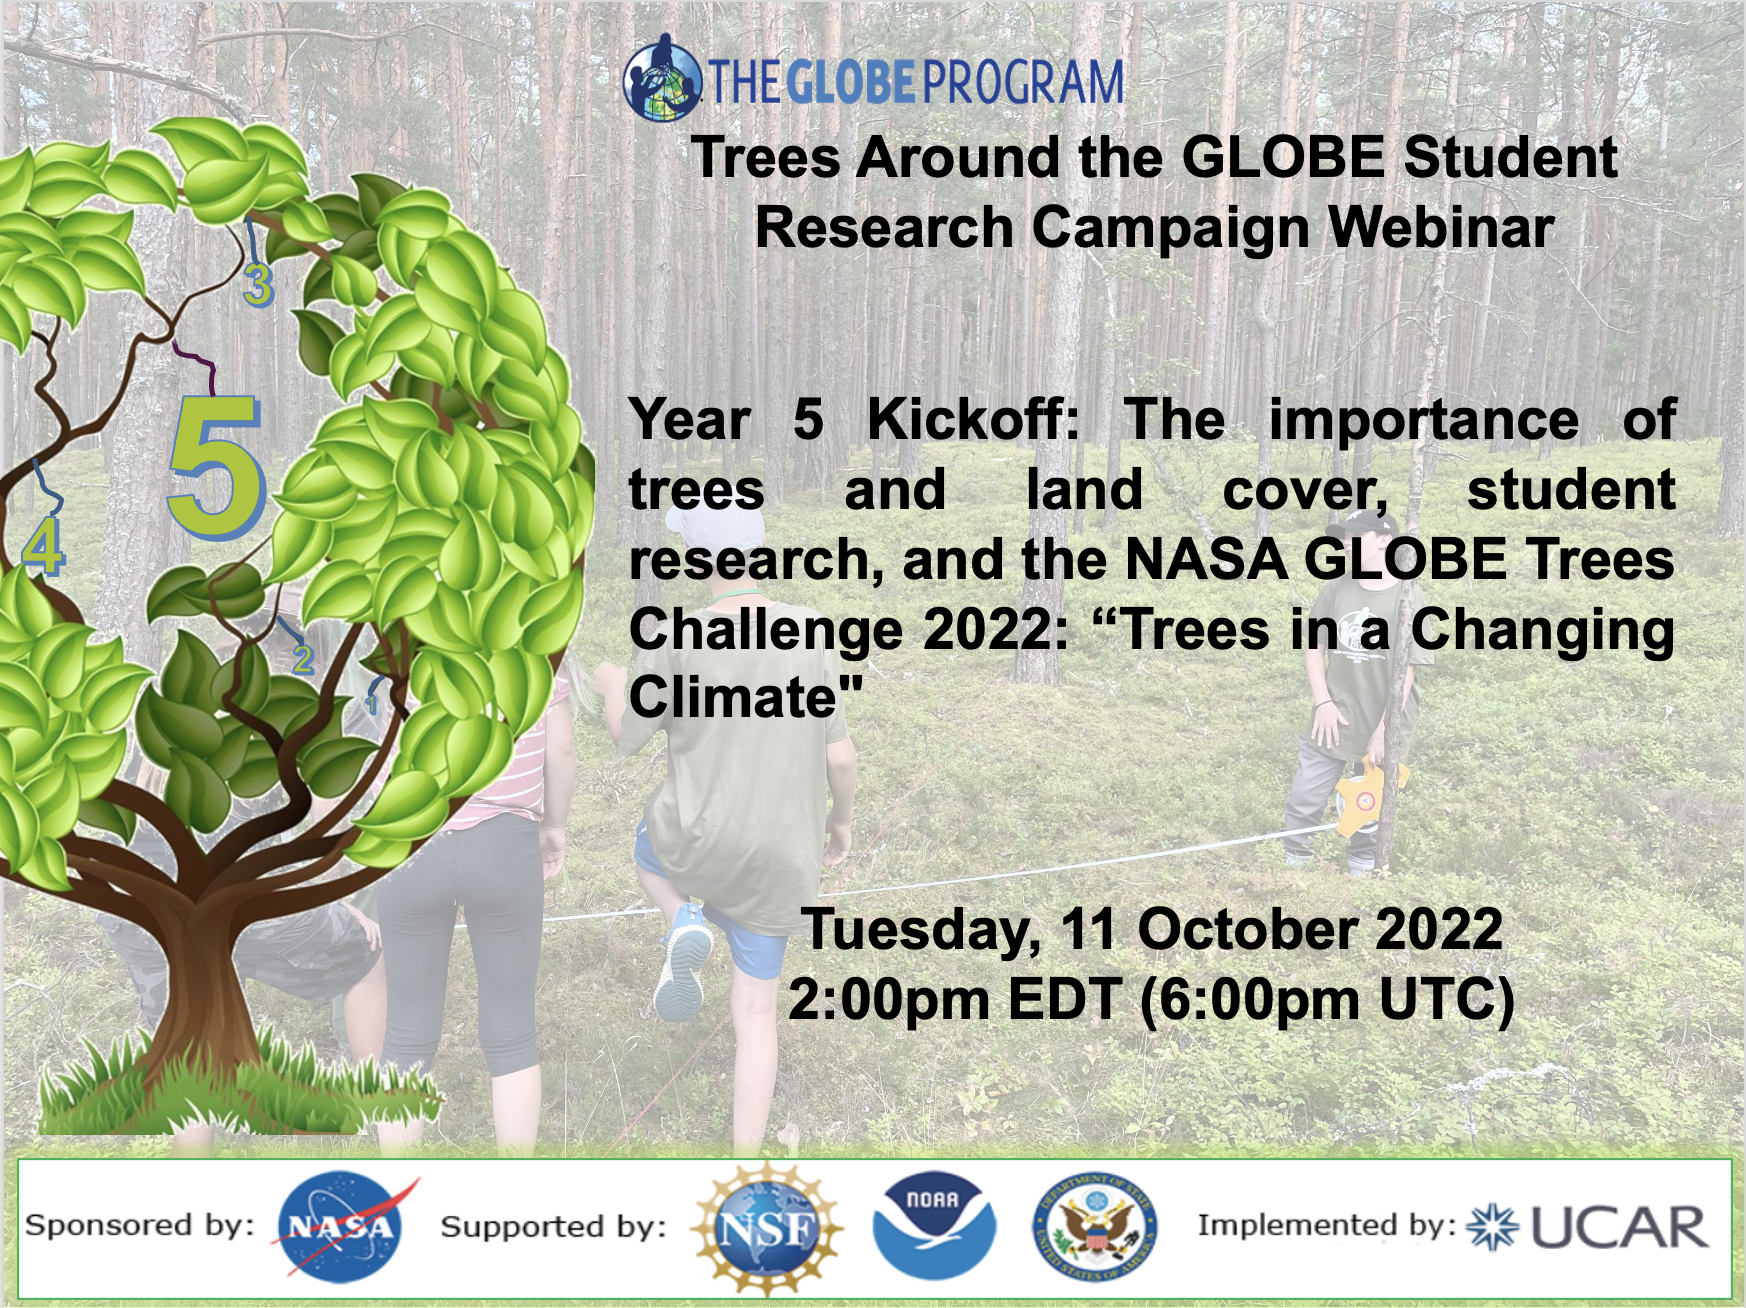 The Trees Around the GLOBE 11 October webinar shareable, showing the title and date of the event